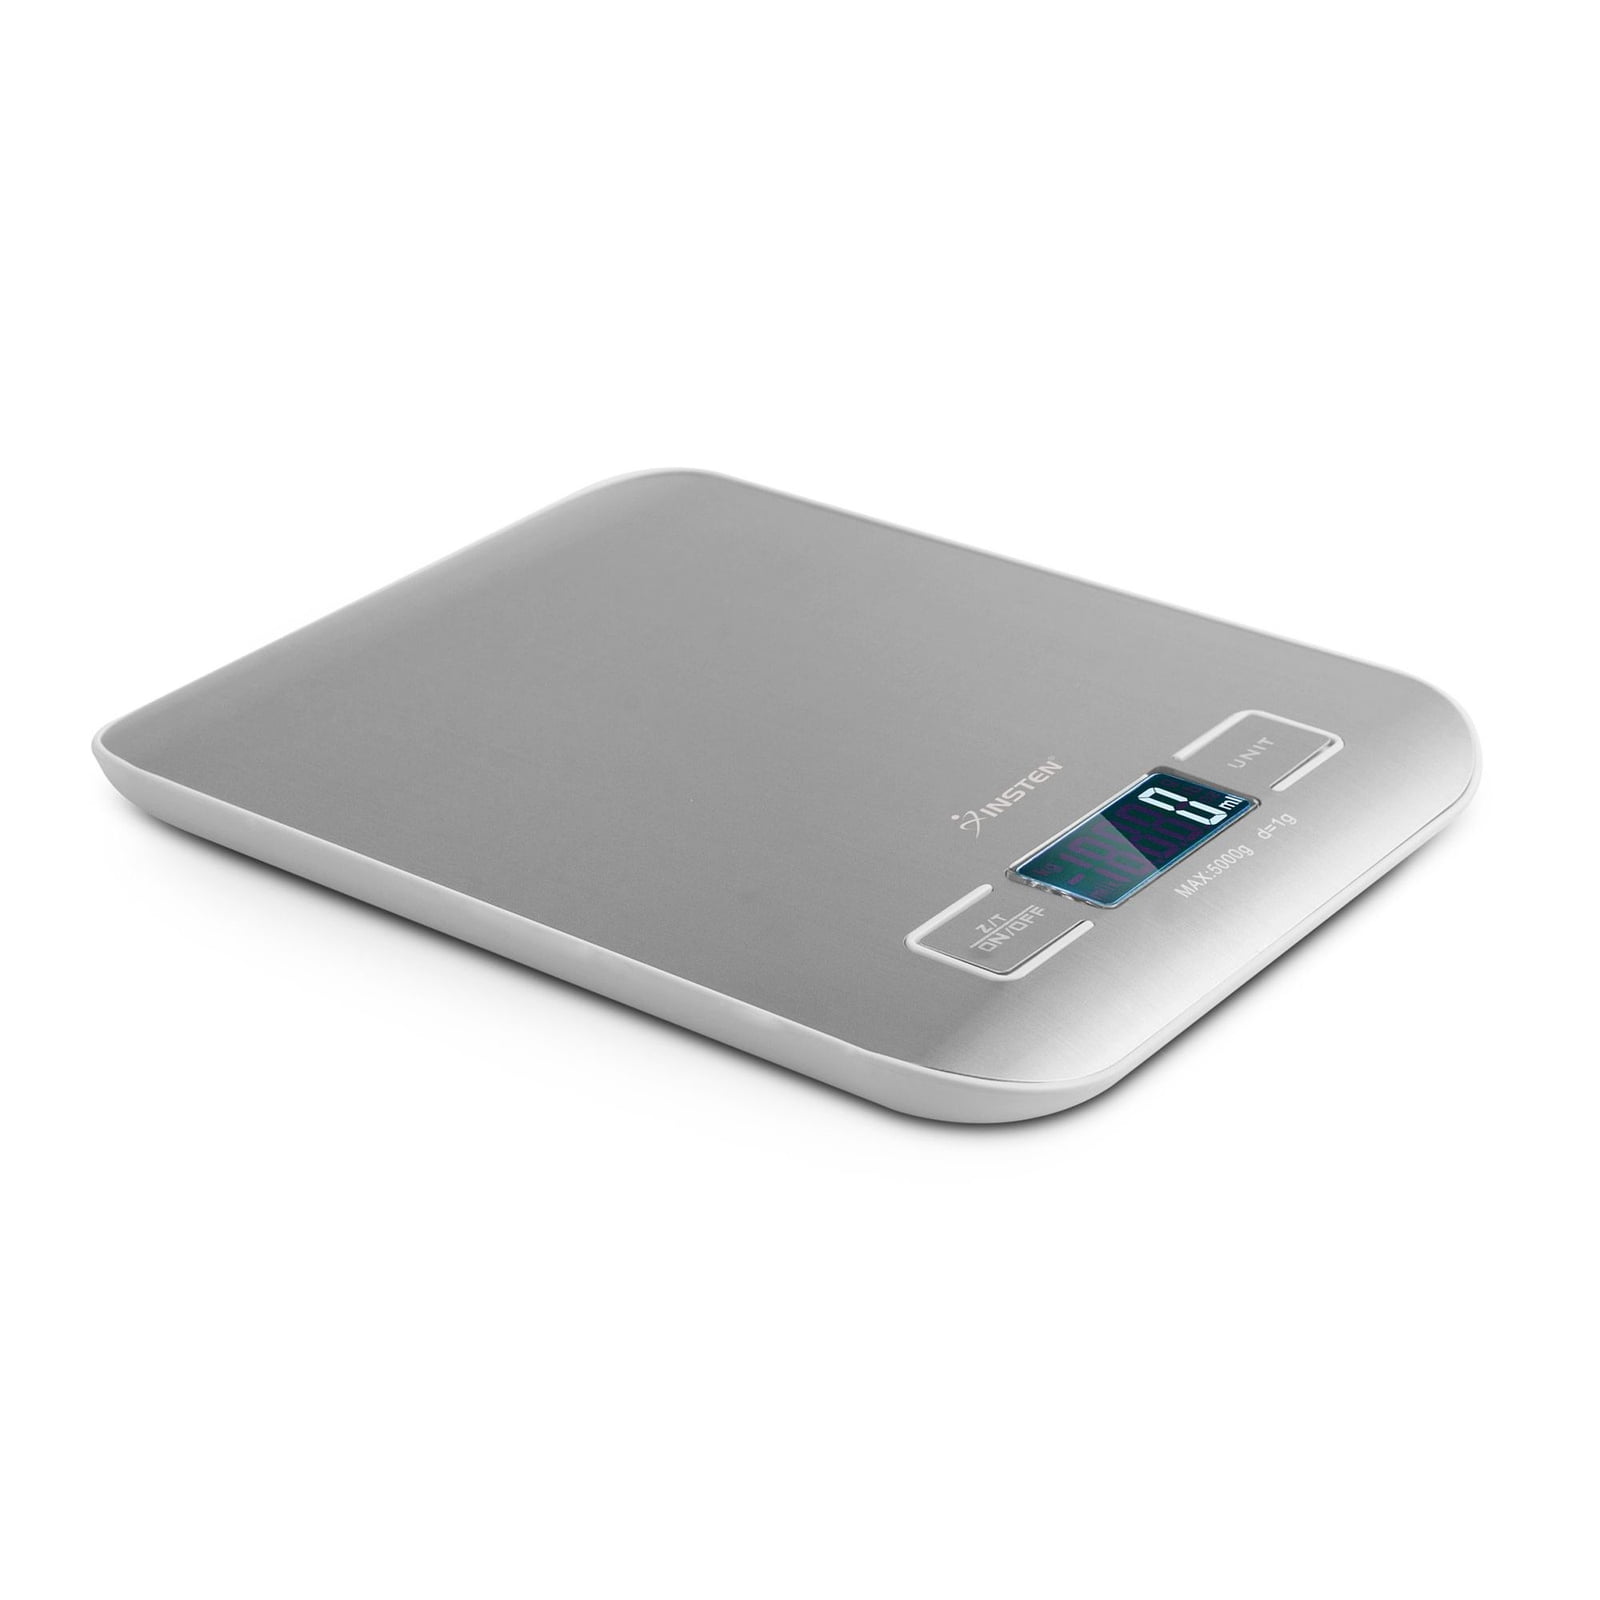 CK451 5000g/1g Kitchen Digital Scale Electronic LED Display Cooking Baking  Food Scale Weight Measuring Tool (CE Certificated) - Silver Wholesale